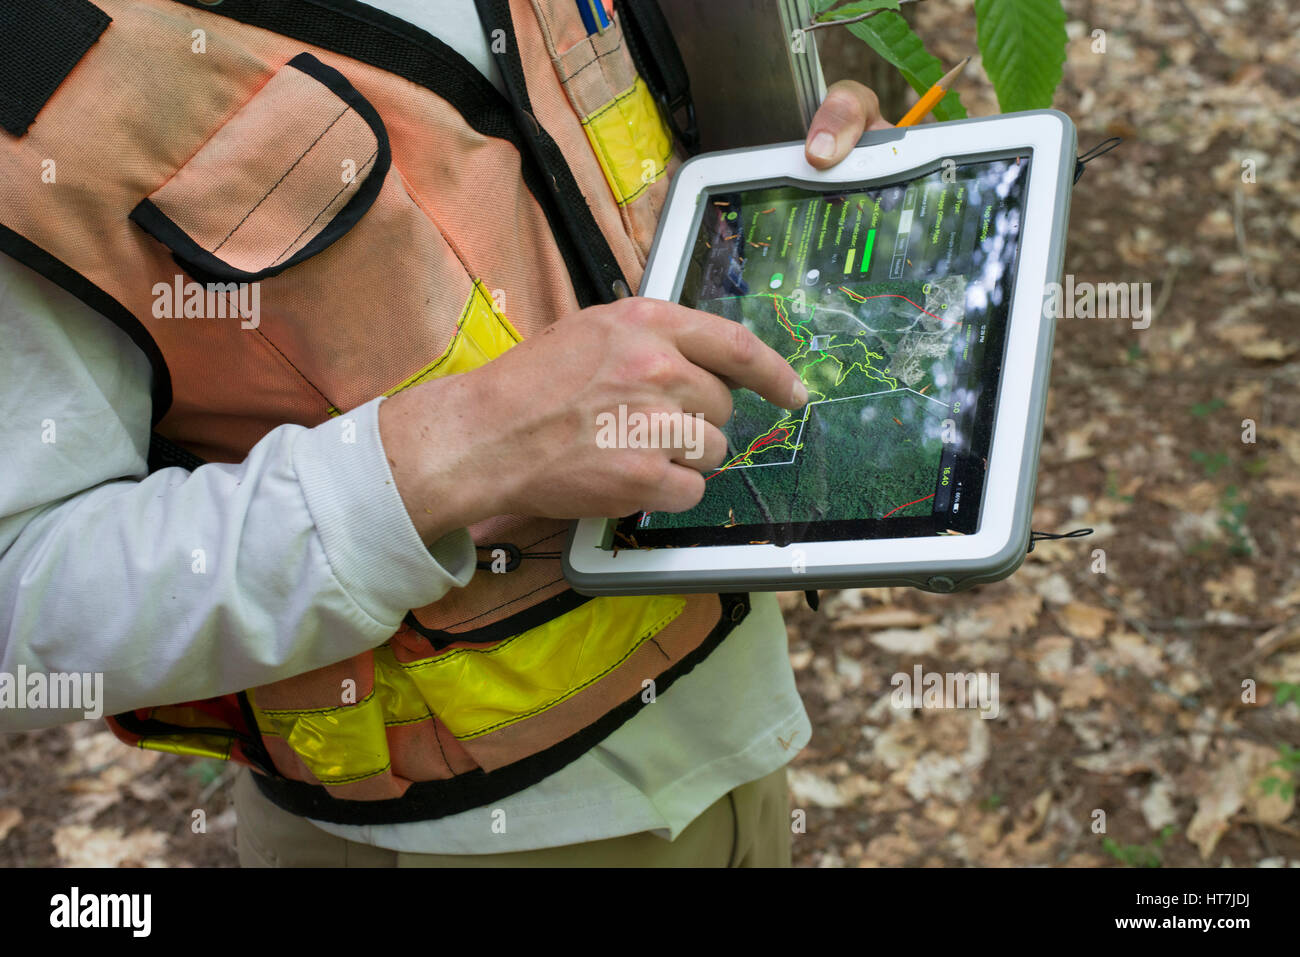 A Person Holding Ipad For Mapping And Surveying A Preserve In New Hampshire Stock Photo